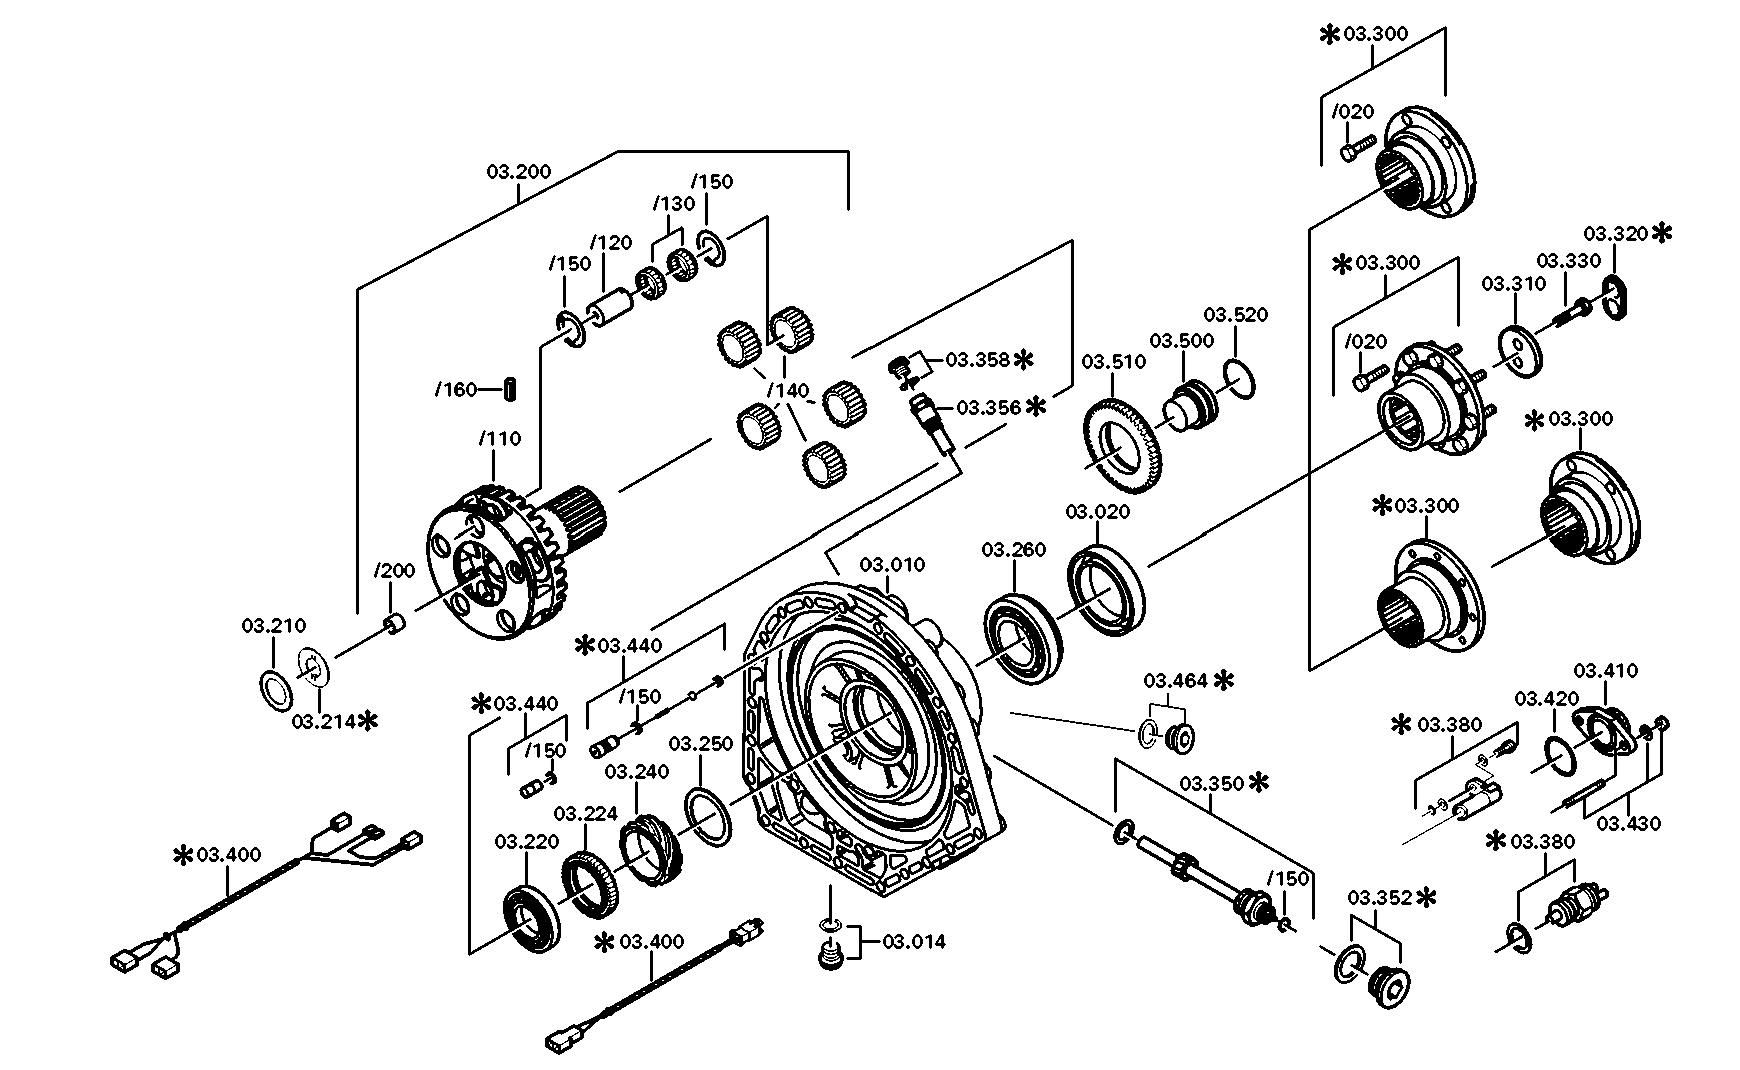 drawing for MOXY TRUCKS AS 252627 - O-RING (figure 1)